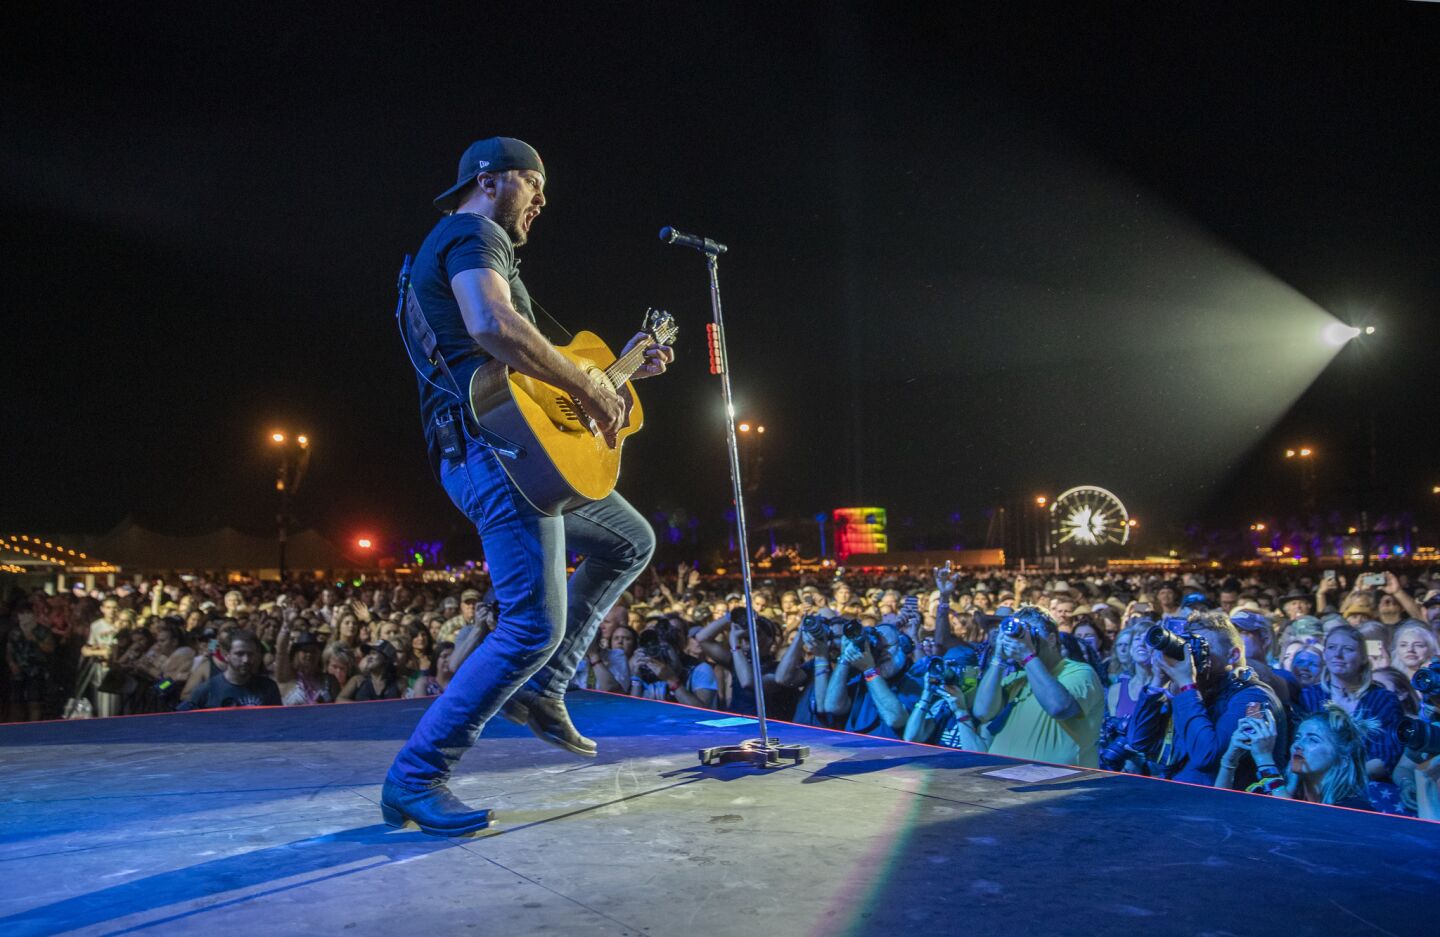 Luke Bryan performs on the Mane Stage as he headlines the first day of the three-day 2019 Stagecoach Country Music Festival.